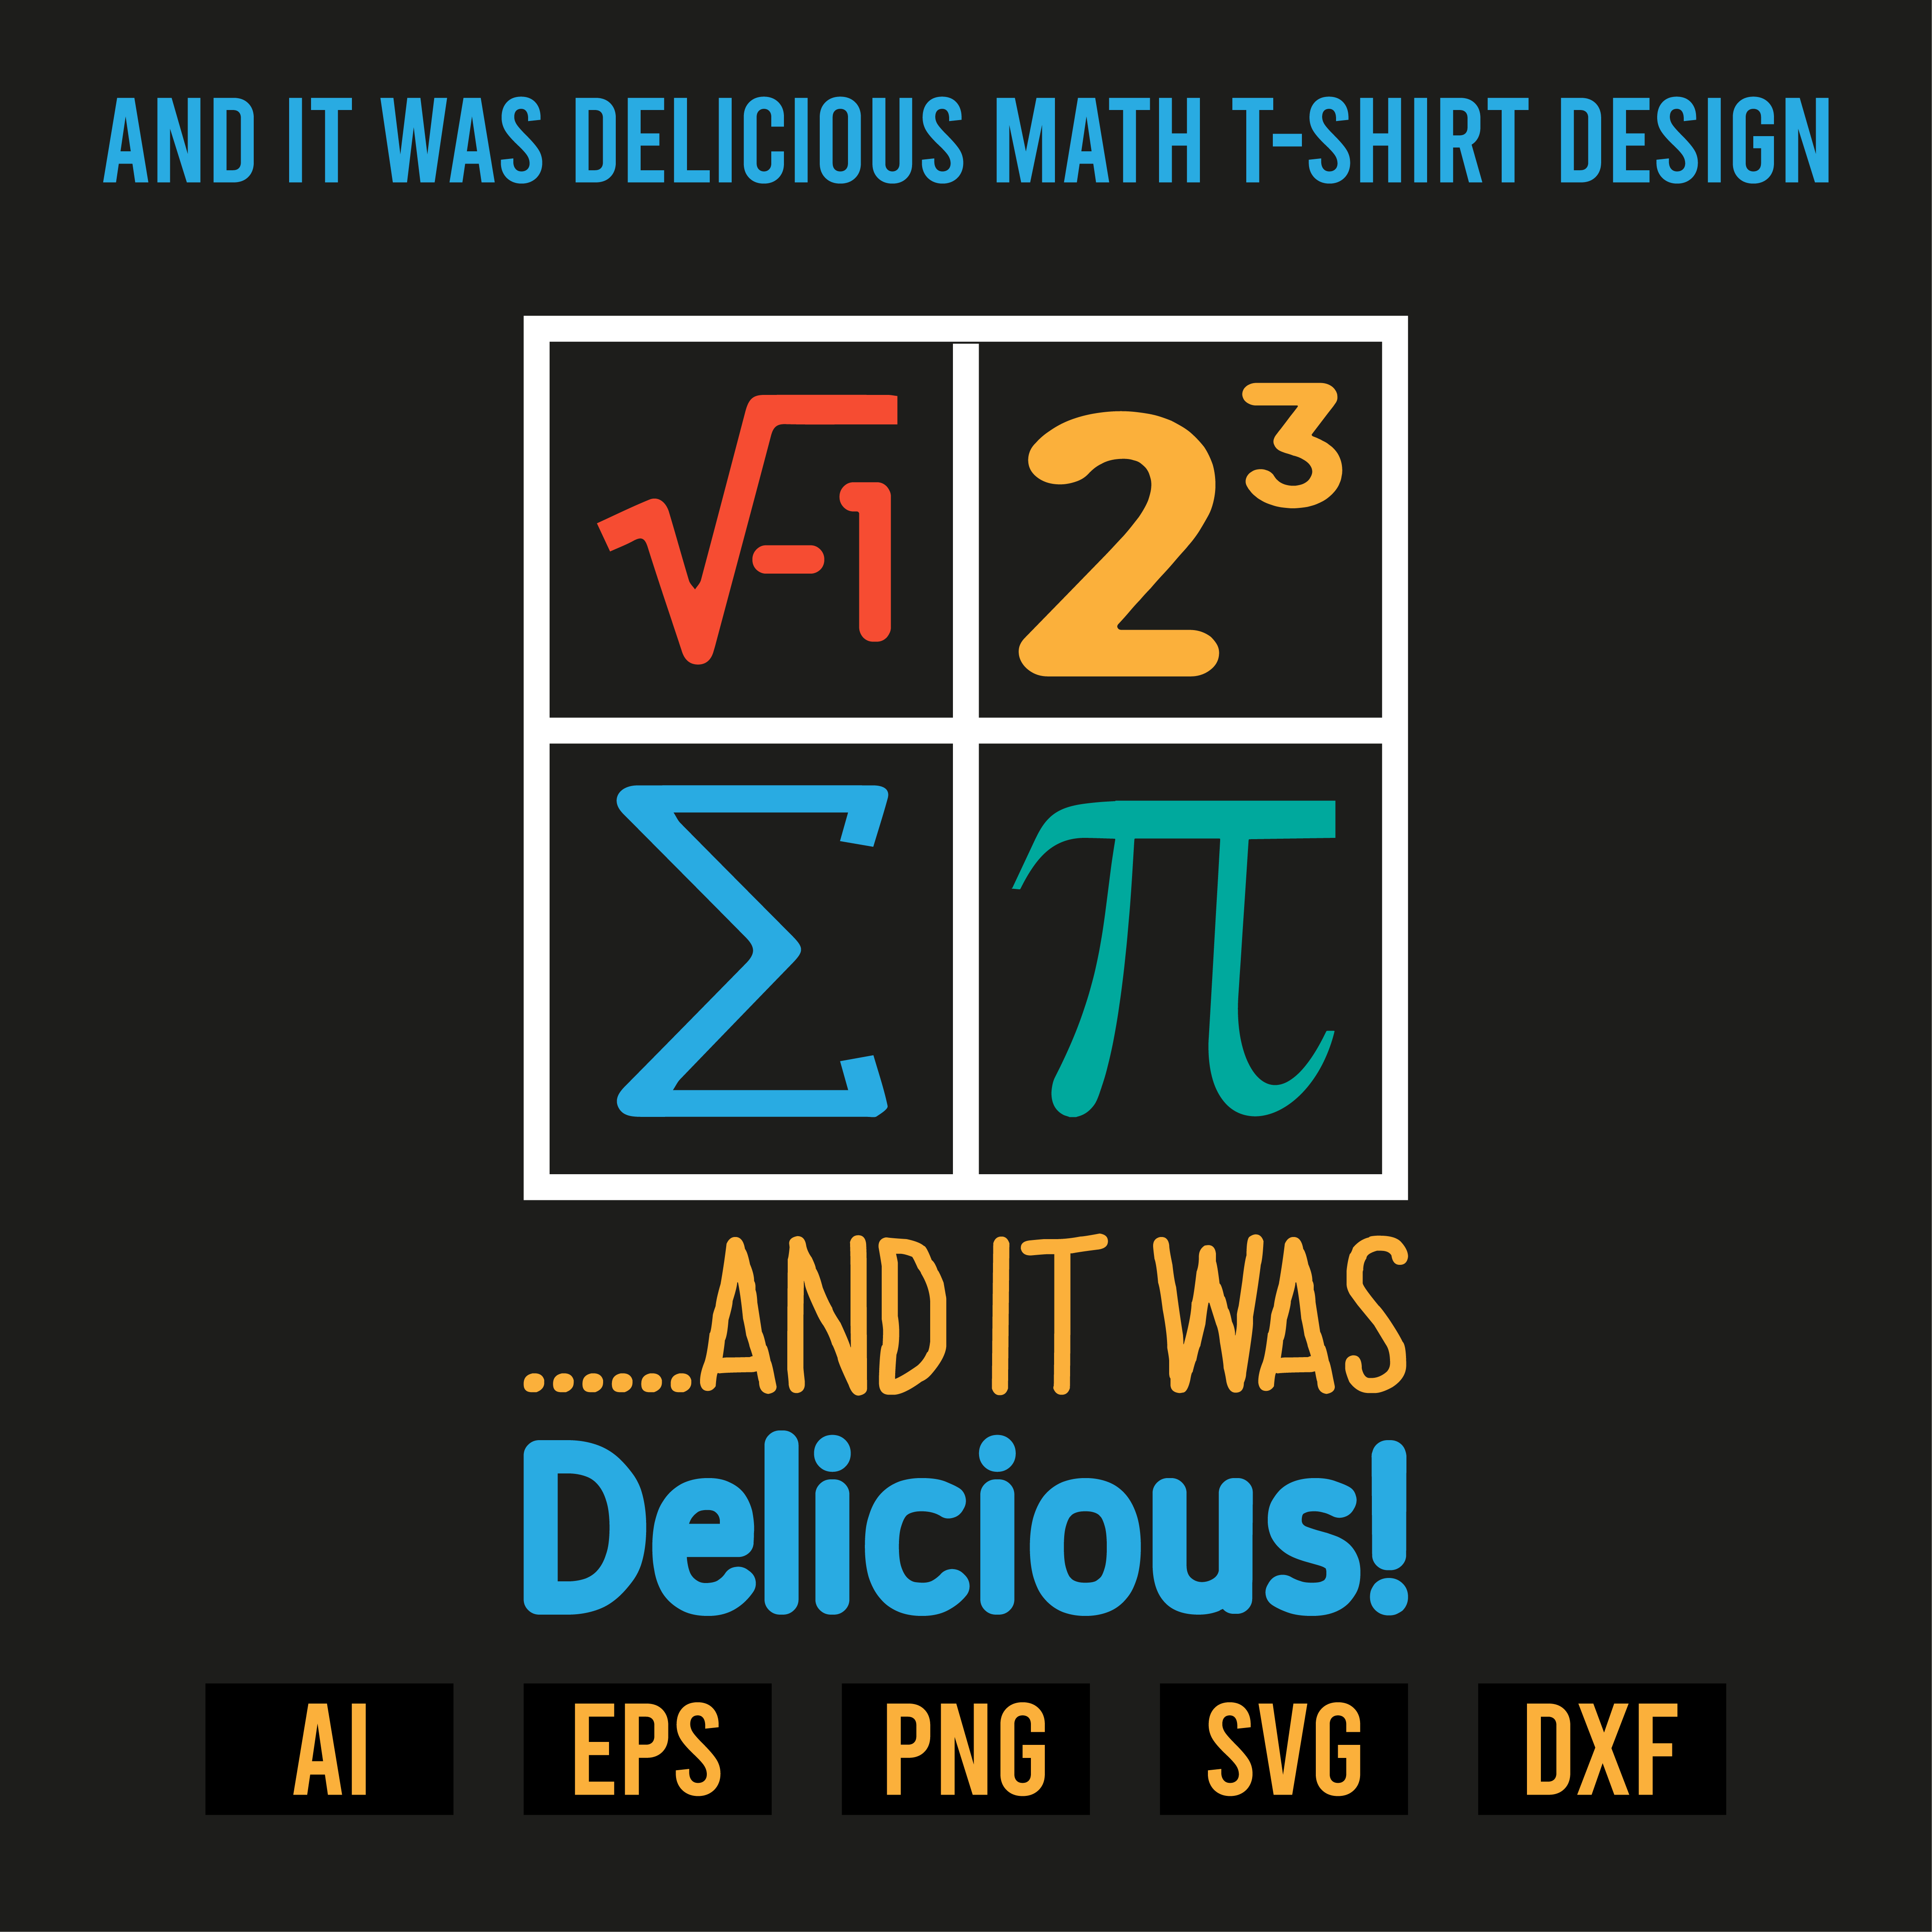 And It Was Delicious Math T-Shirt Design cover image.